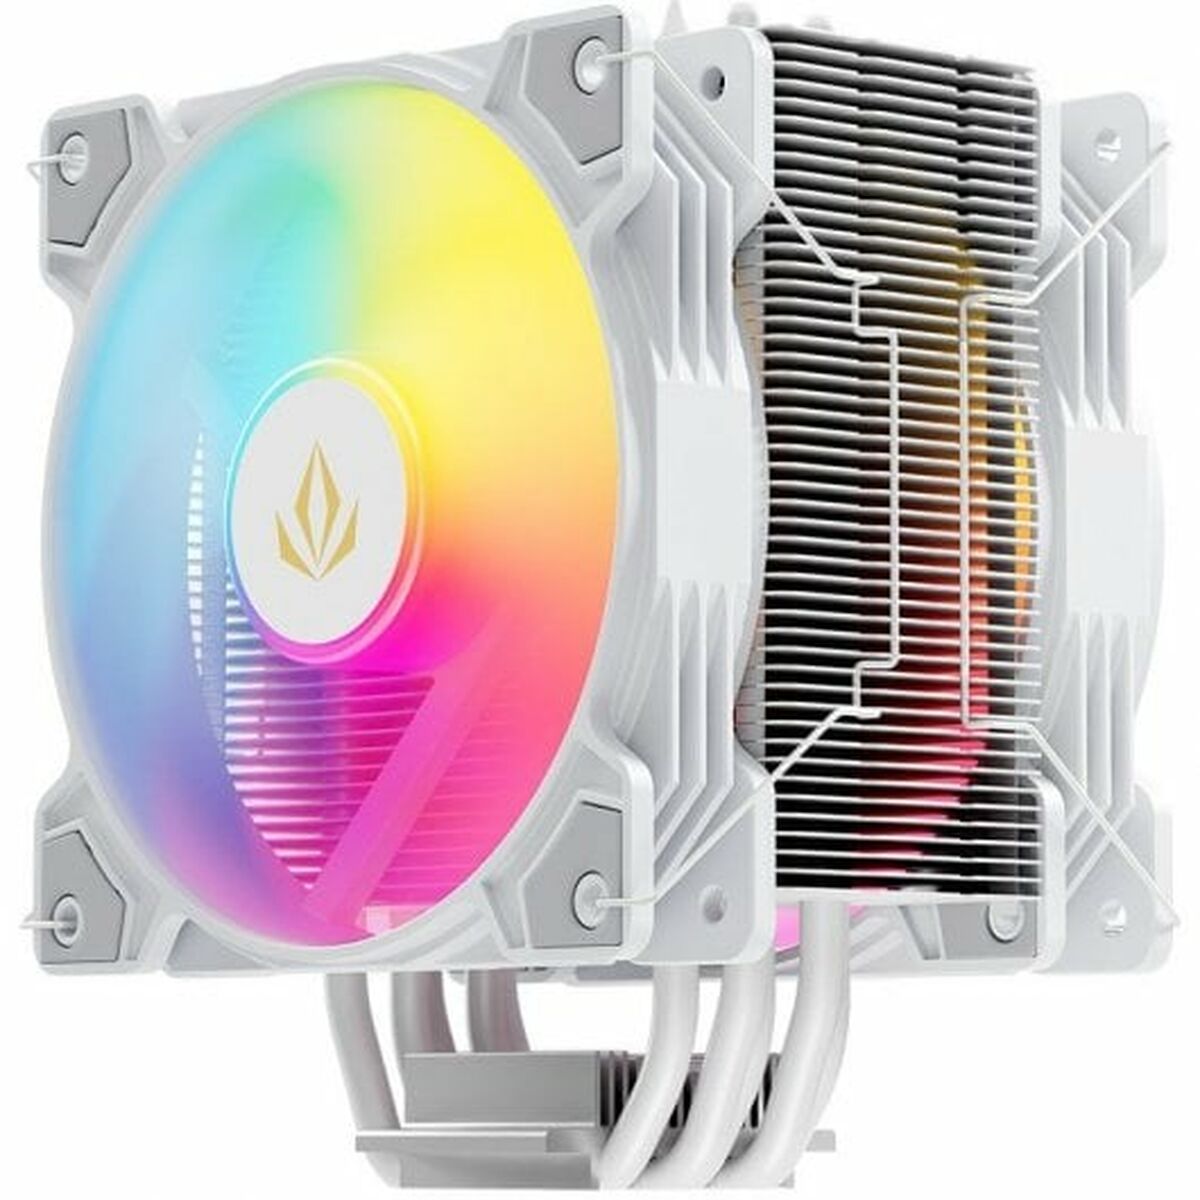 Laptop Fan Forgeon, Forgeon, Computing, Components, notebook-cooling-fan-forgeon, Brand_Forgeon, category-reference-2609, category-reference-2803, category-reference-2815, category-reference-t-19685, category-reference-t-19912, category-reference-t-21360, category-reference-t-25668, category-reference-t-29842, computers / components, Condition_NEW, Price_200 - 300, Teleworking, RiotNook